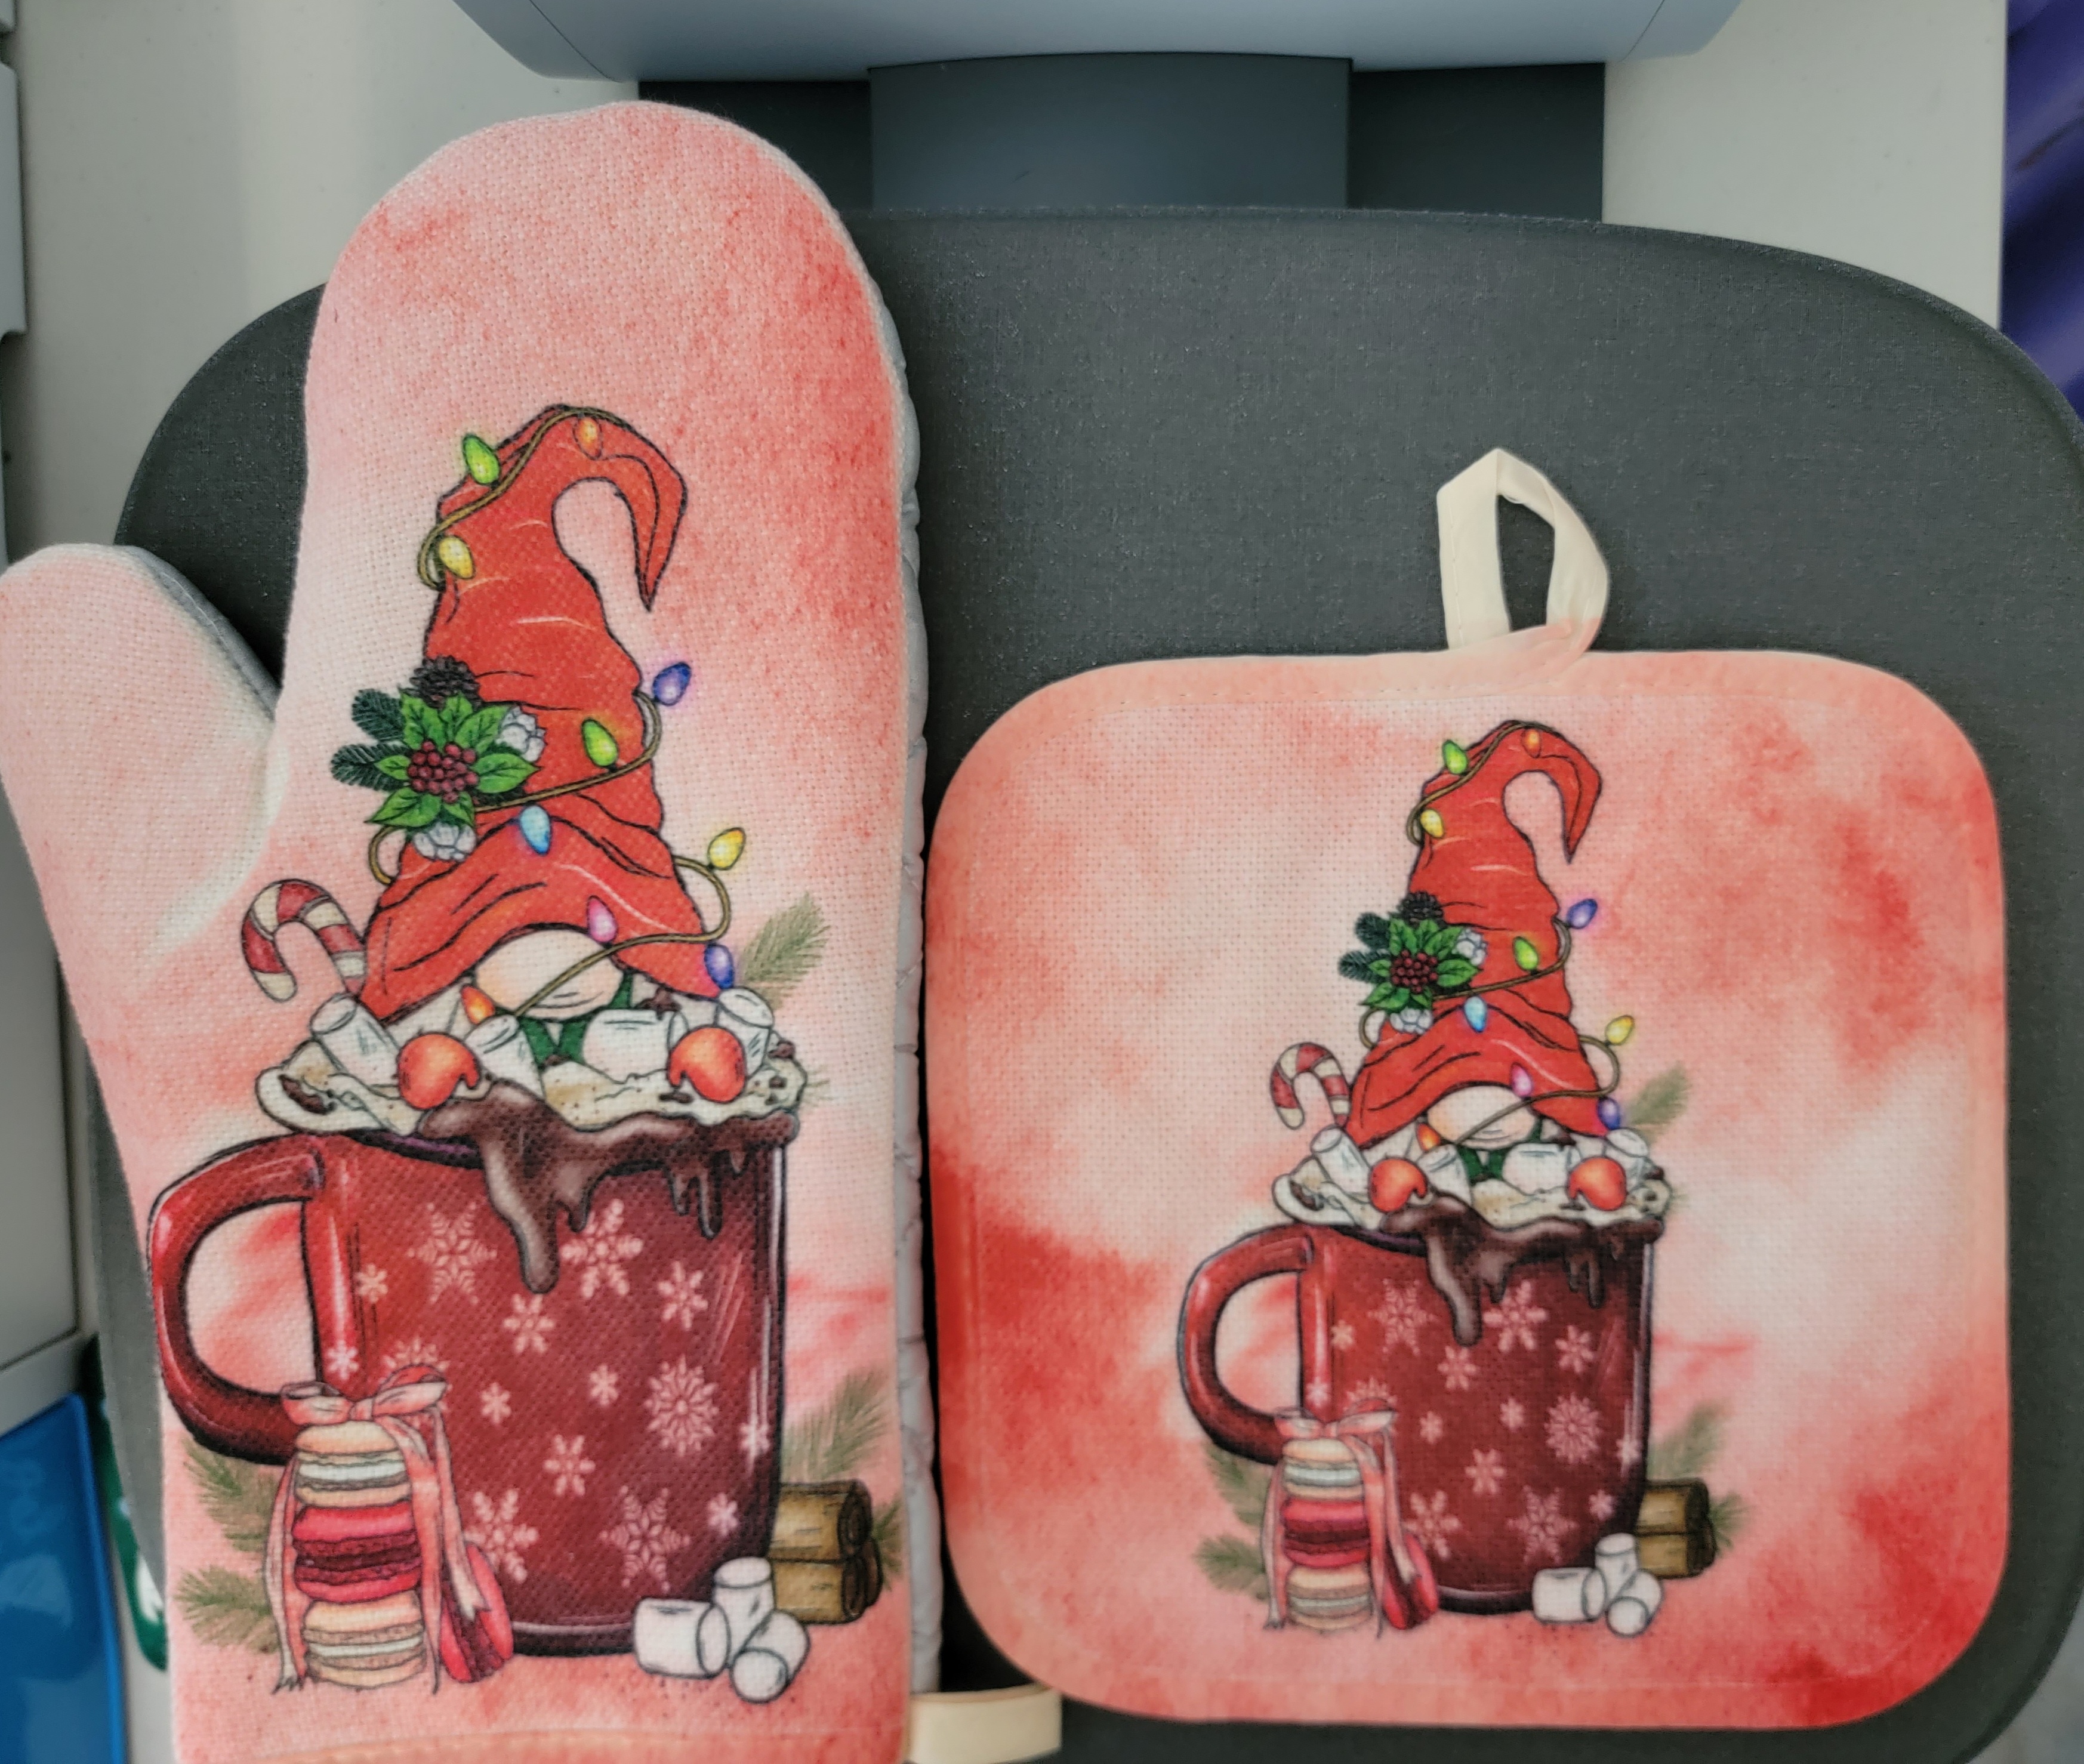 Holiday Oven mitt/potholder set made with sublimation printing